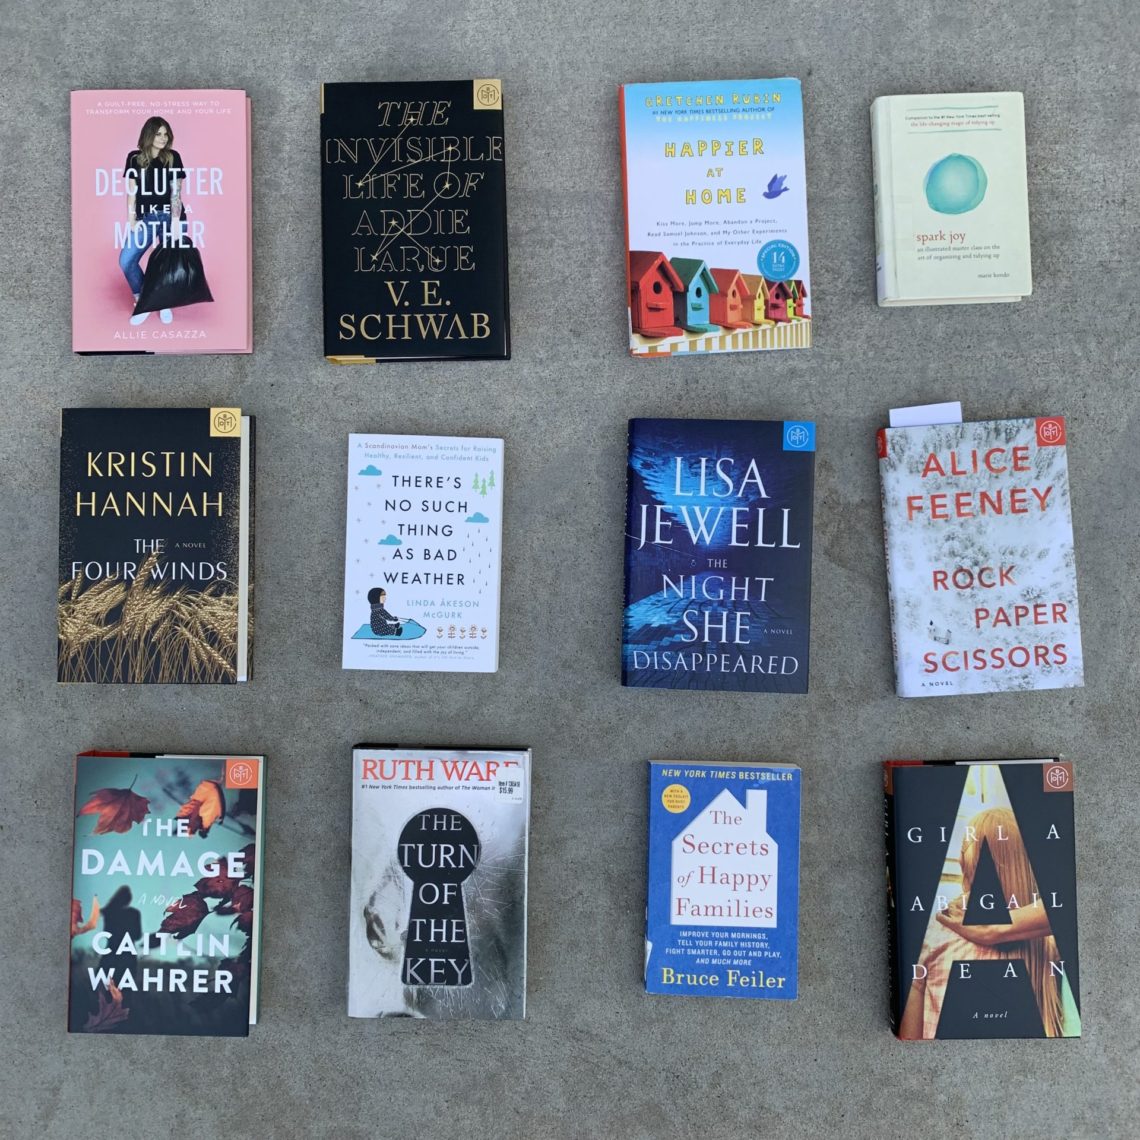 Over 25 books to add to your 2021 fall reading list including nonfiction, fiction and lots of thrillers for spooky season! #bookideas #bookrecommendations #whattoread #adultreadinglist